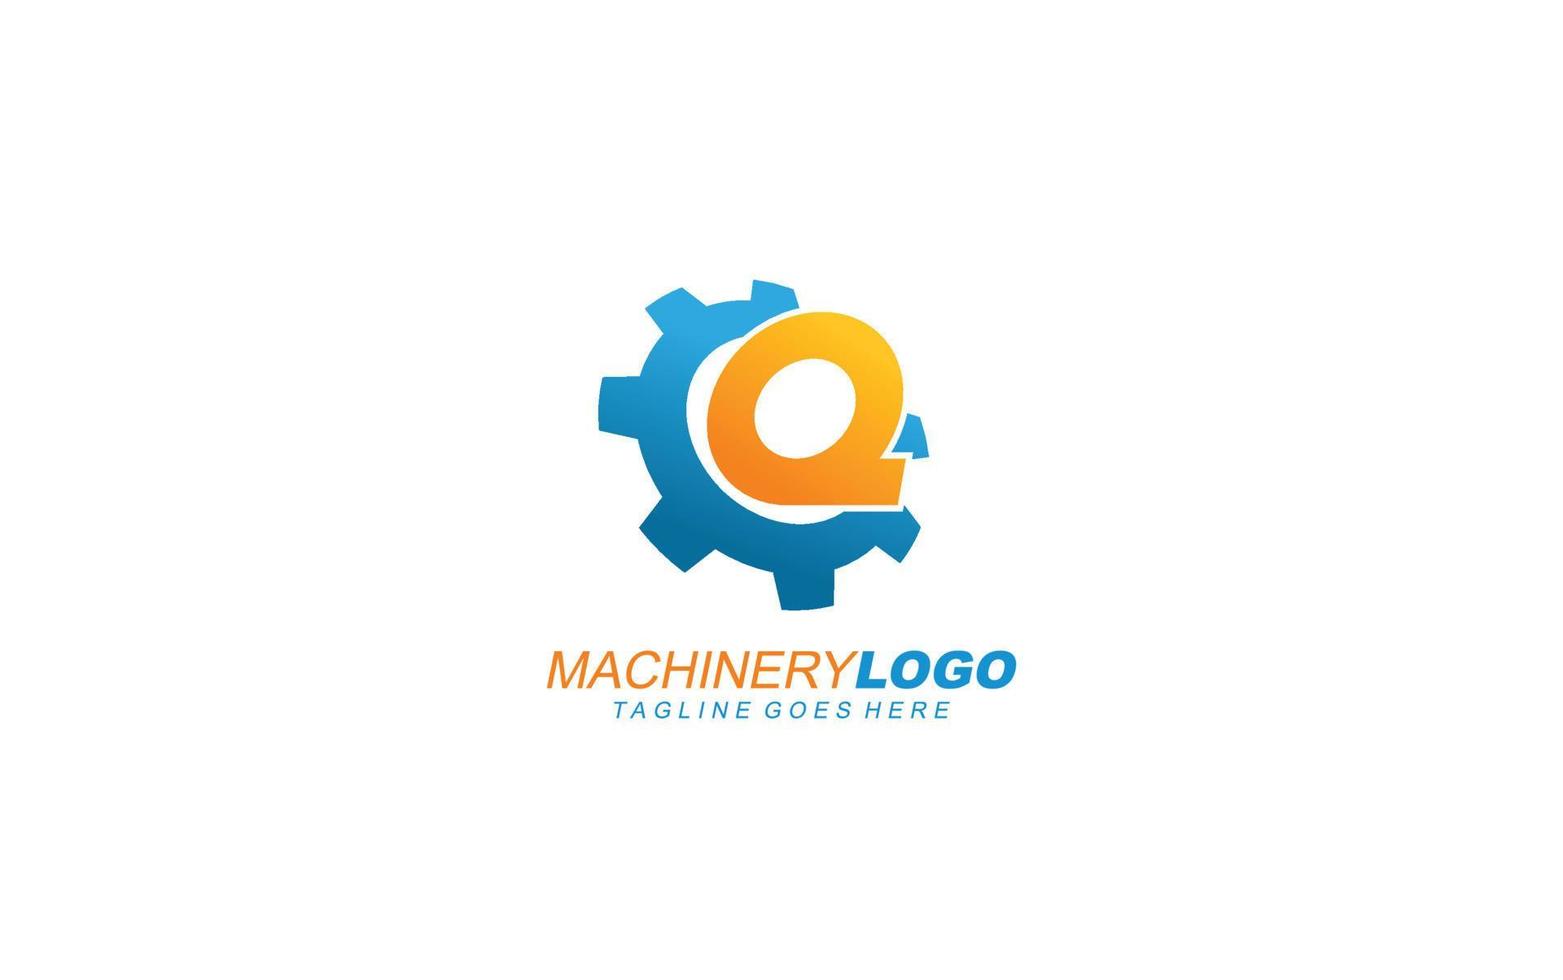 Q logo gear for identity. industrial template vector illustration for your brand.